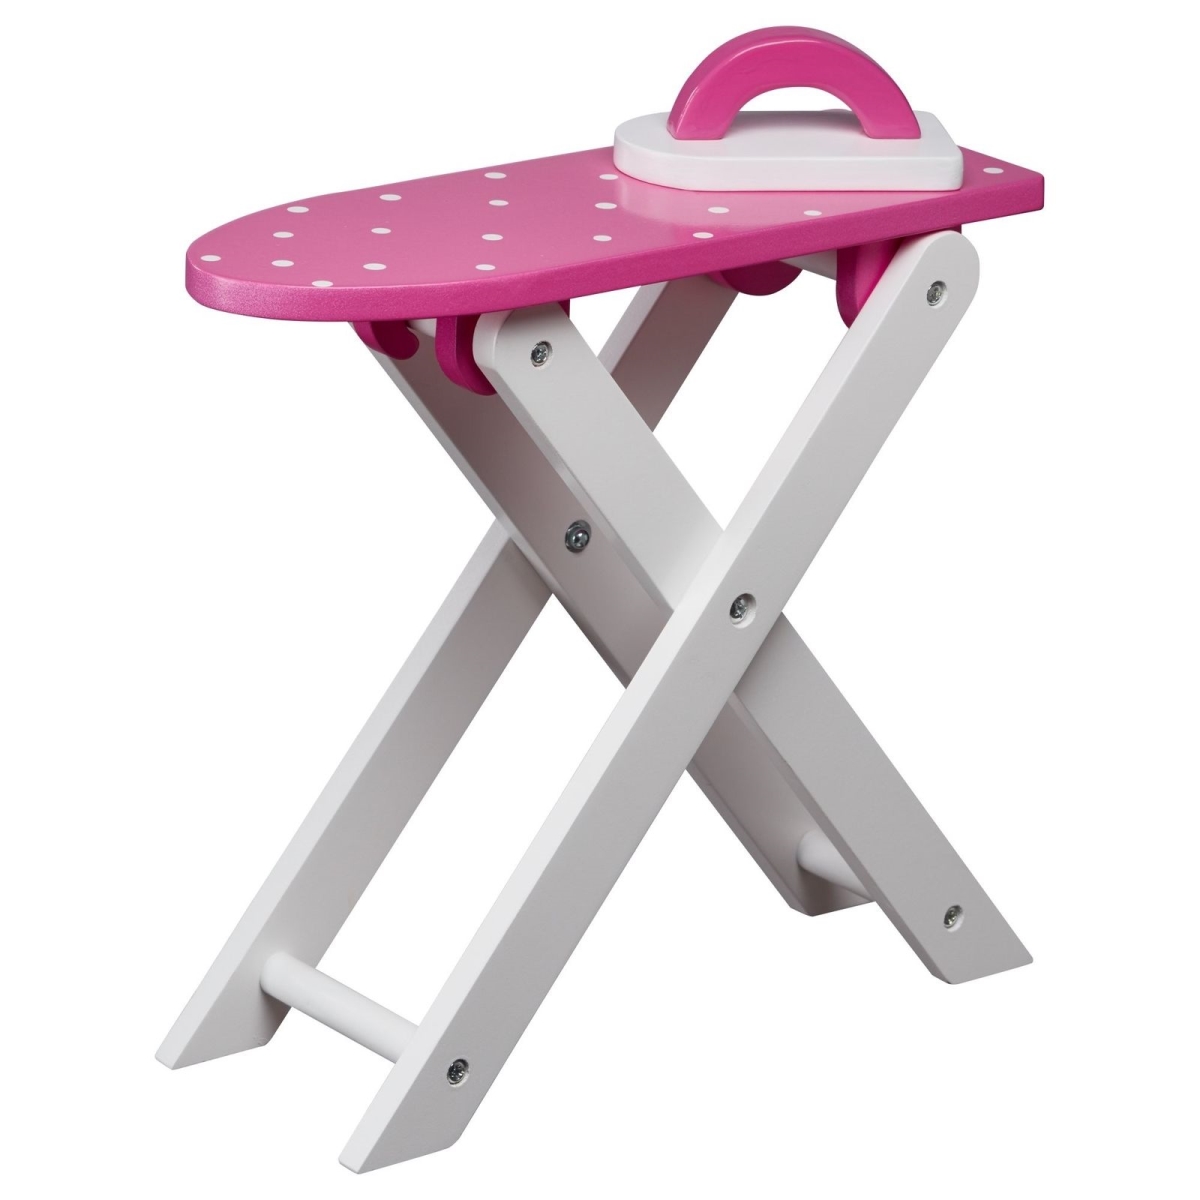 Td-12684a 18 In. Little Princess Doll Ironing Board, Pink